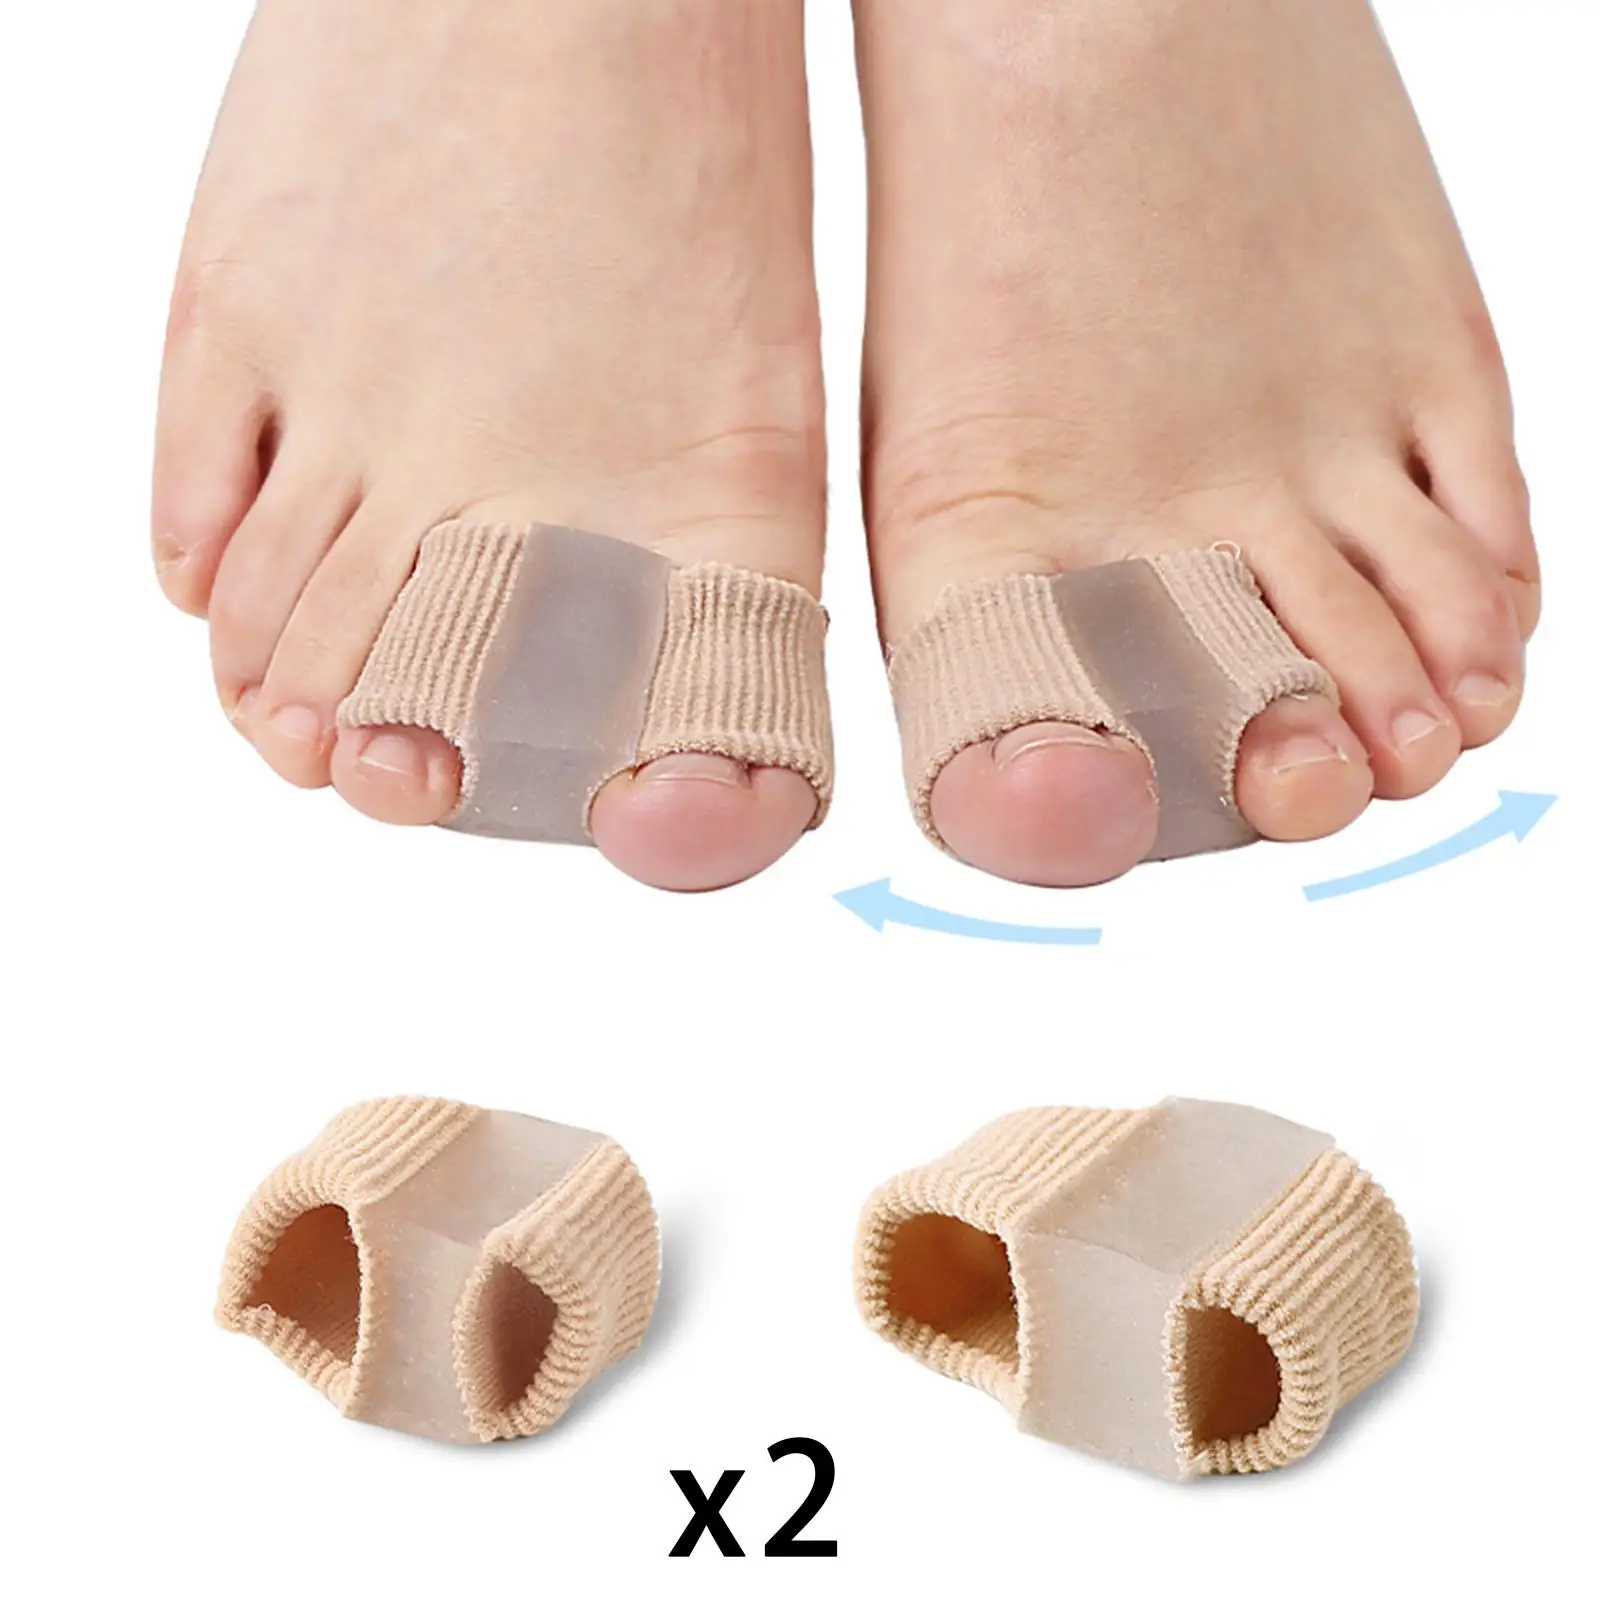 2 Pieces Toe Separators Gel with 2 Loops Comfort Day and Night Bunion Splint Toe Valgus Correction Lightweight Guard Feet Care